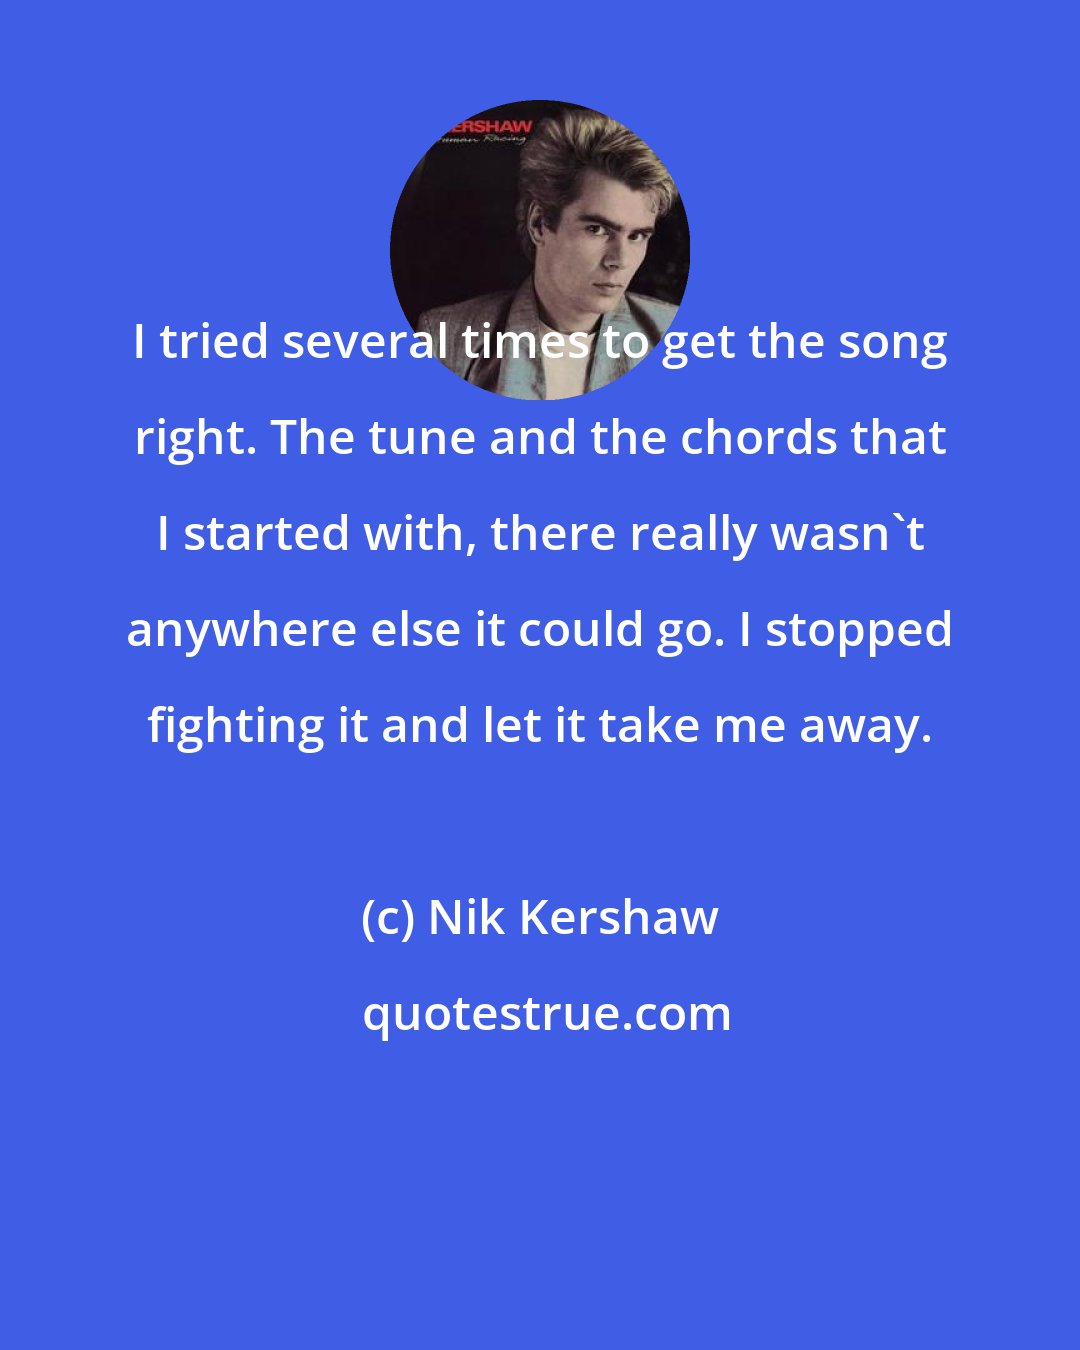 Nik Kershaw: I tried several times to get the song right. The tune and the chords that I started with, there really wasn't anywhere else it could go. I stopped fighting it and let it take me away.